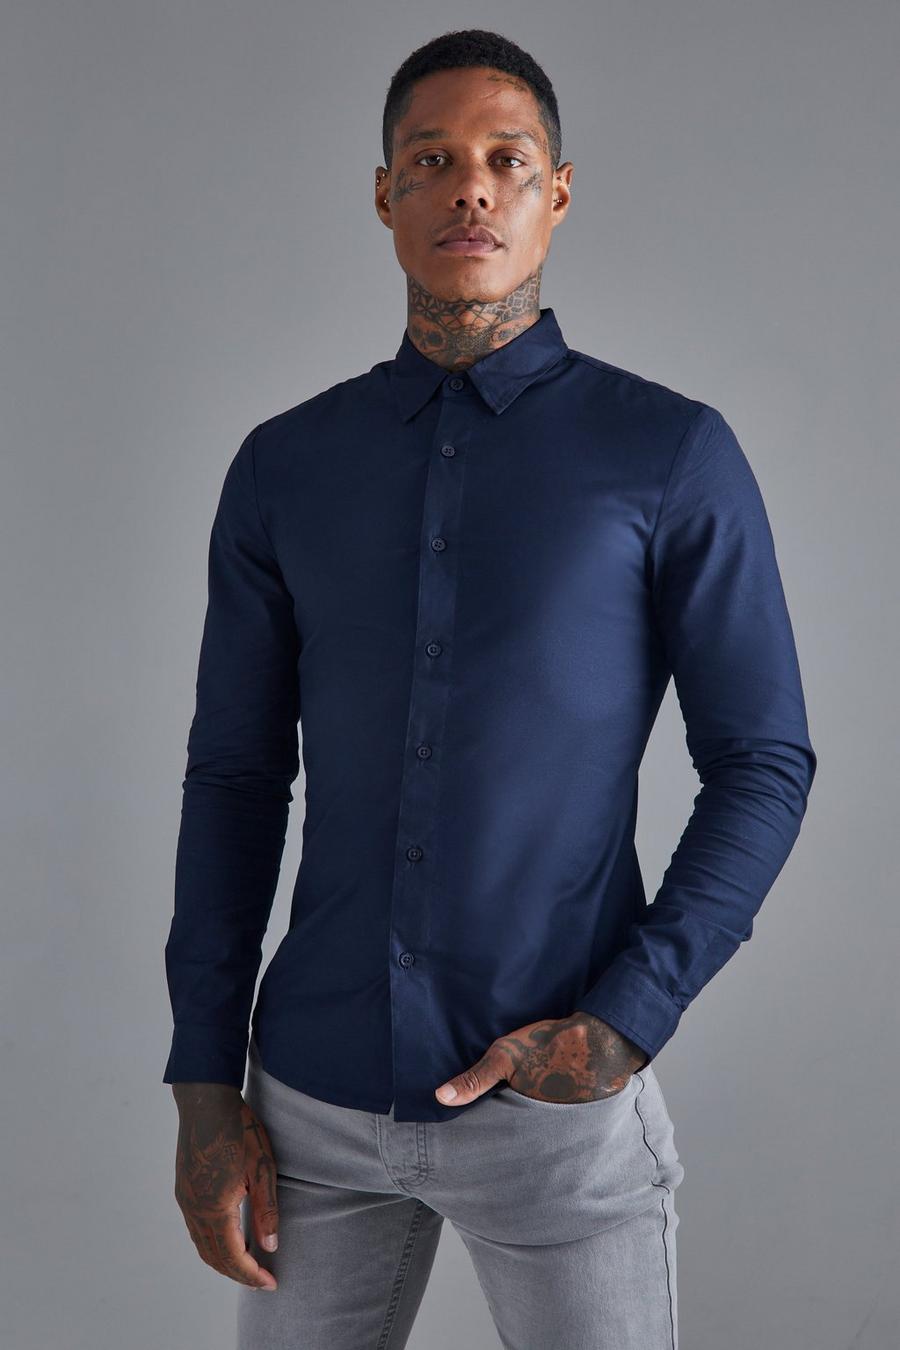 Navy blu oltremare Long Sleeve Muscle Shirt